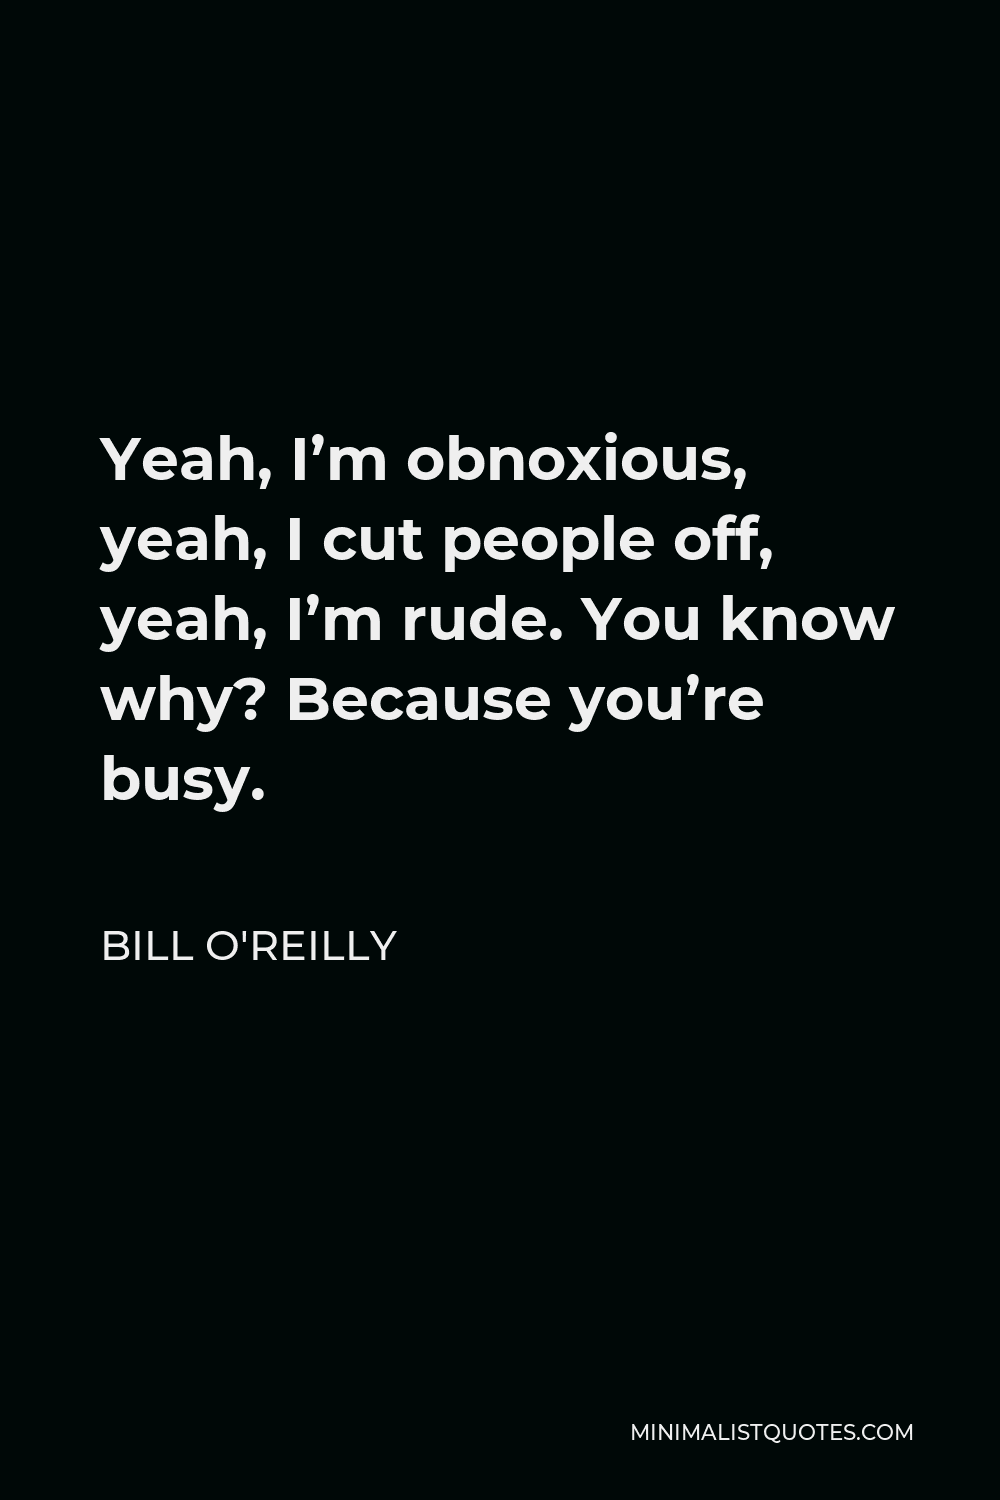 Bill O'Reilly Quote - Yeah, I’m obnoxious, yeah, I cut people off, yeah, I’m rude. You know why? Because you’re busy.